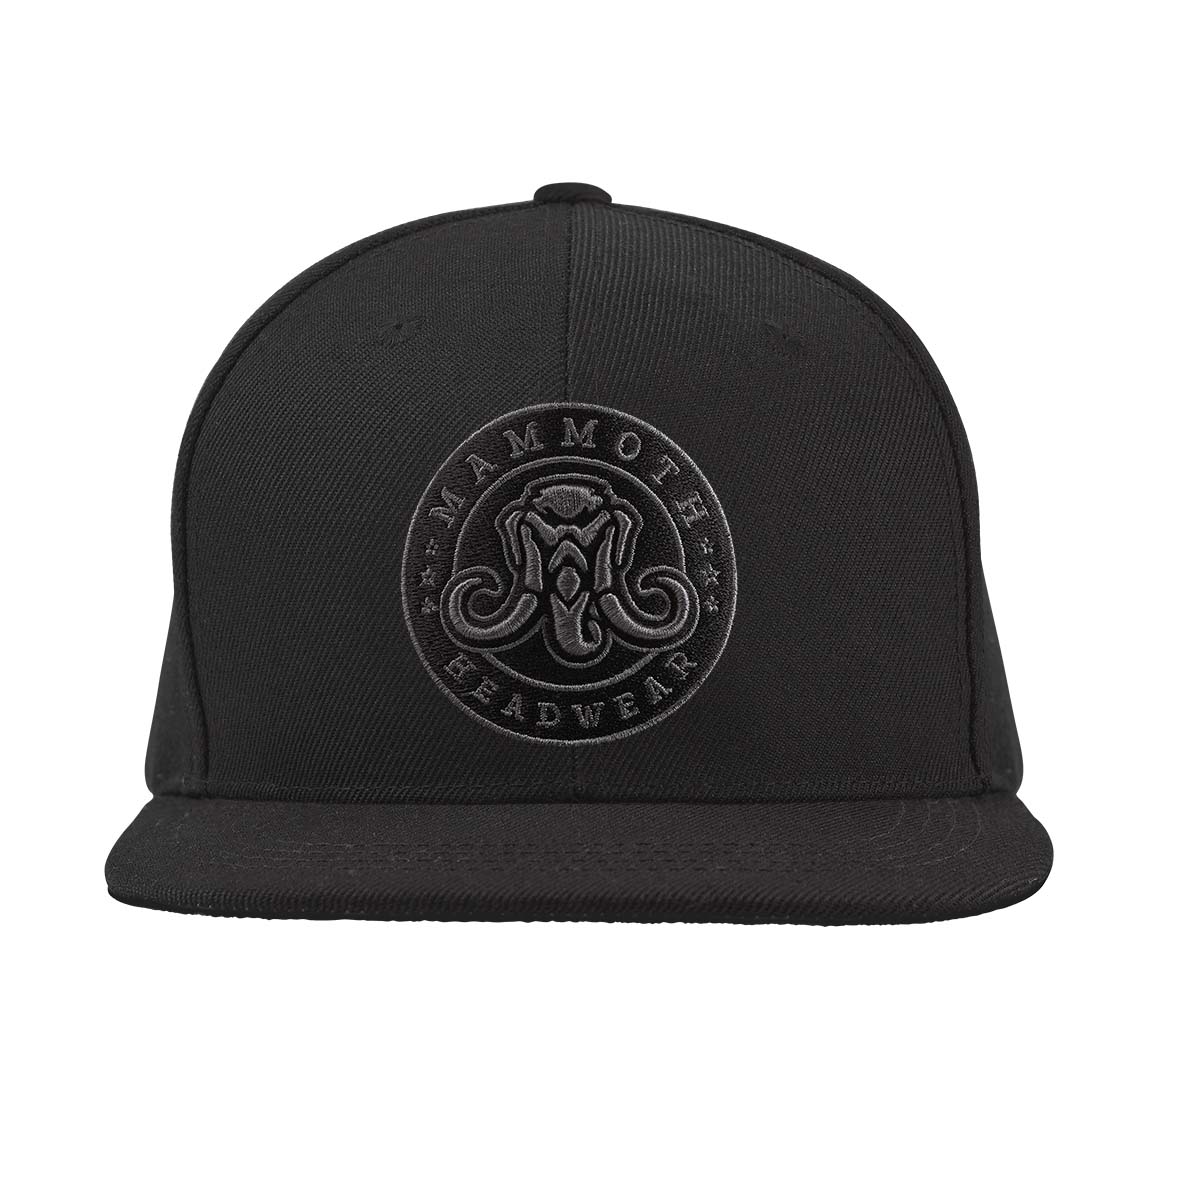 Black Snapback -Blank for a Comfortable Fit. - Mammoth Headwear